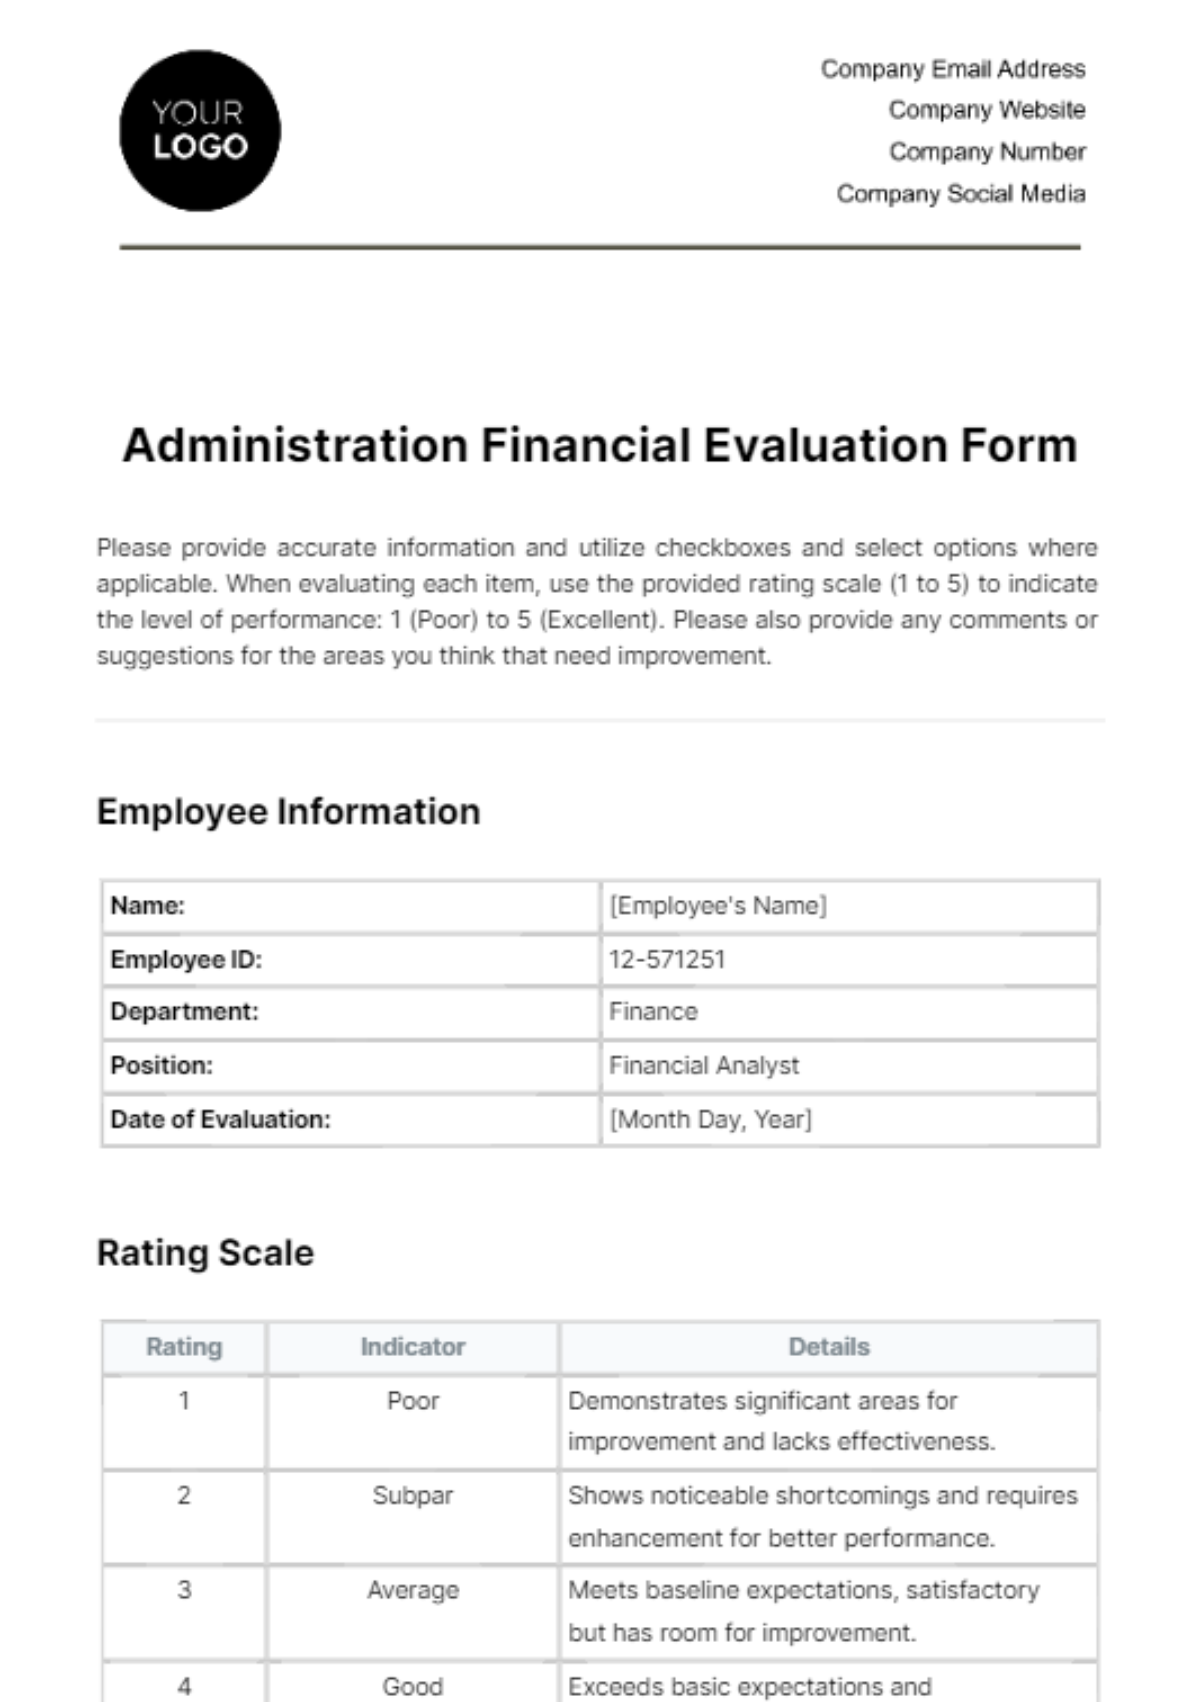 Free Administration Financial Evaluation Form Template